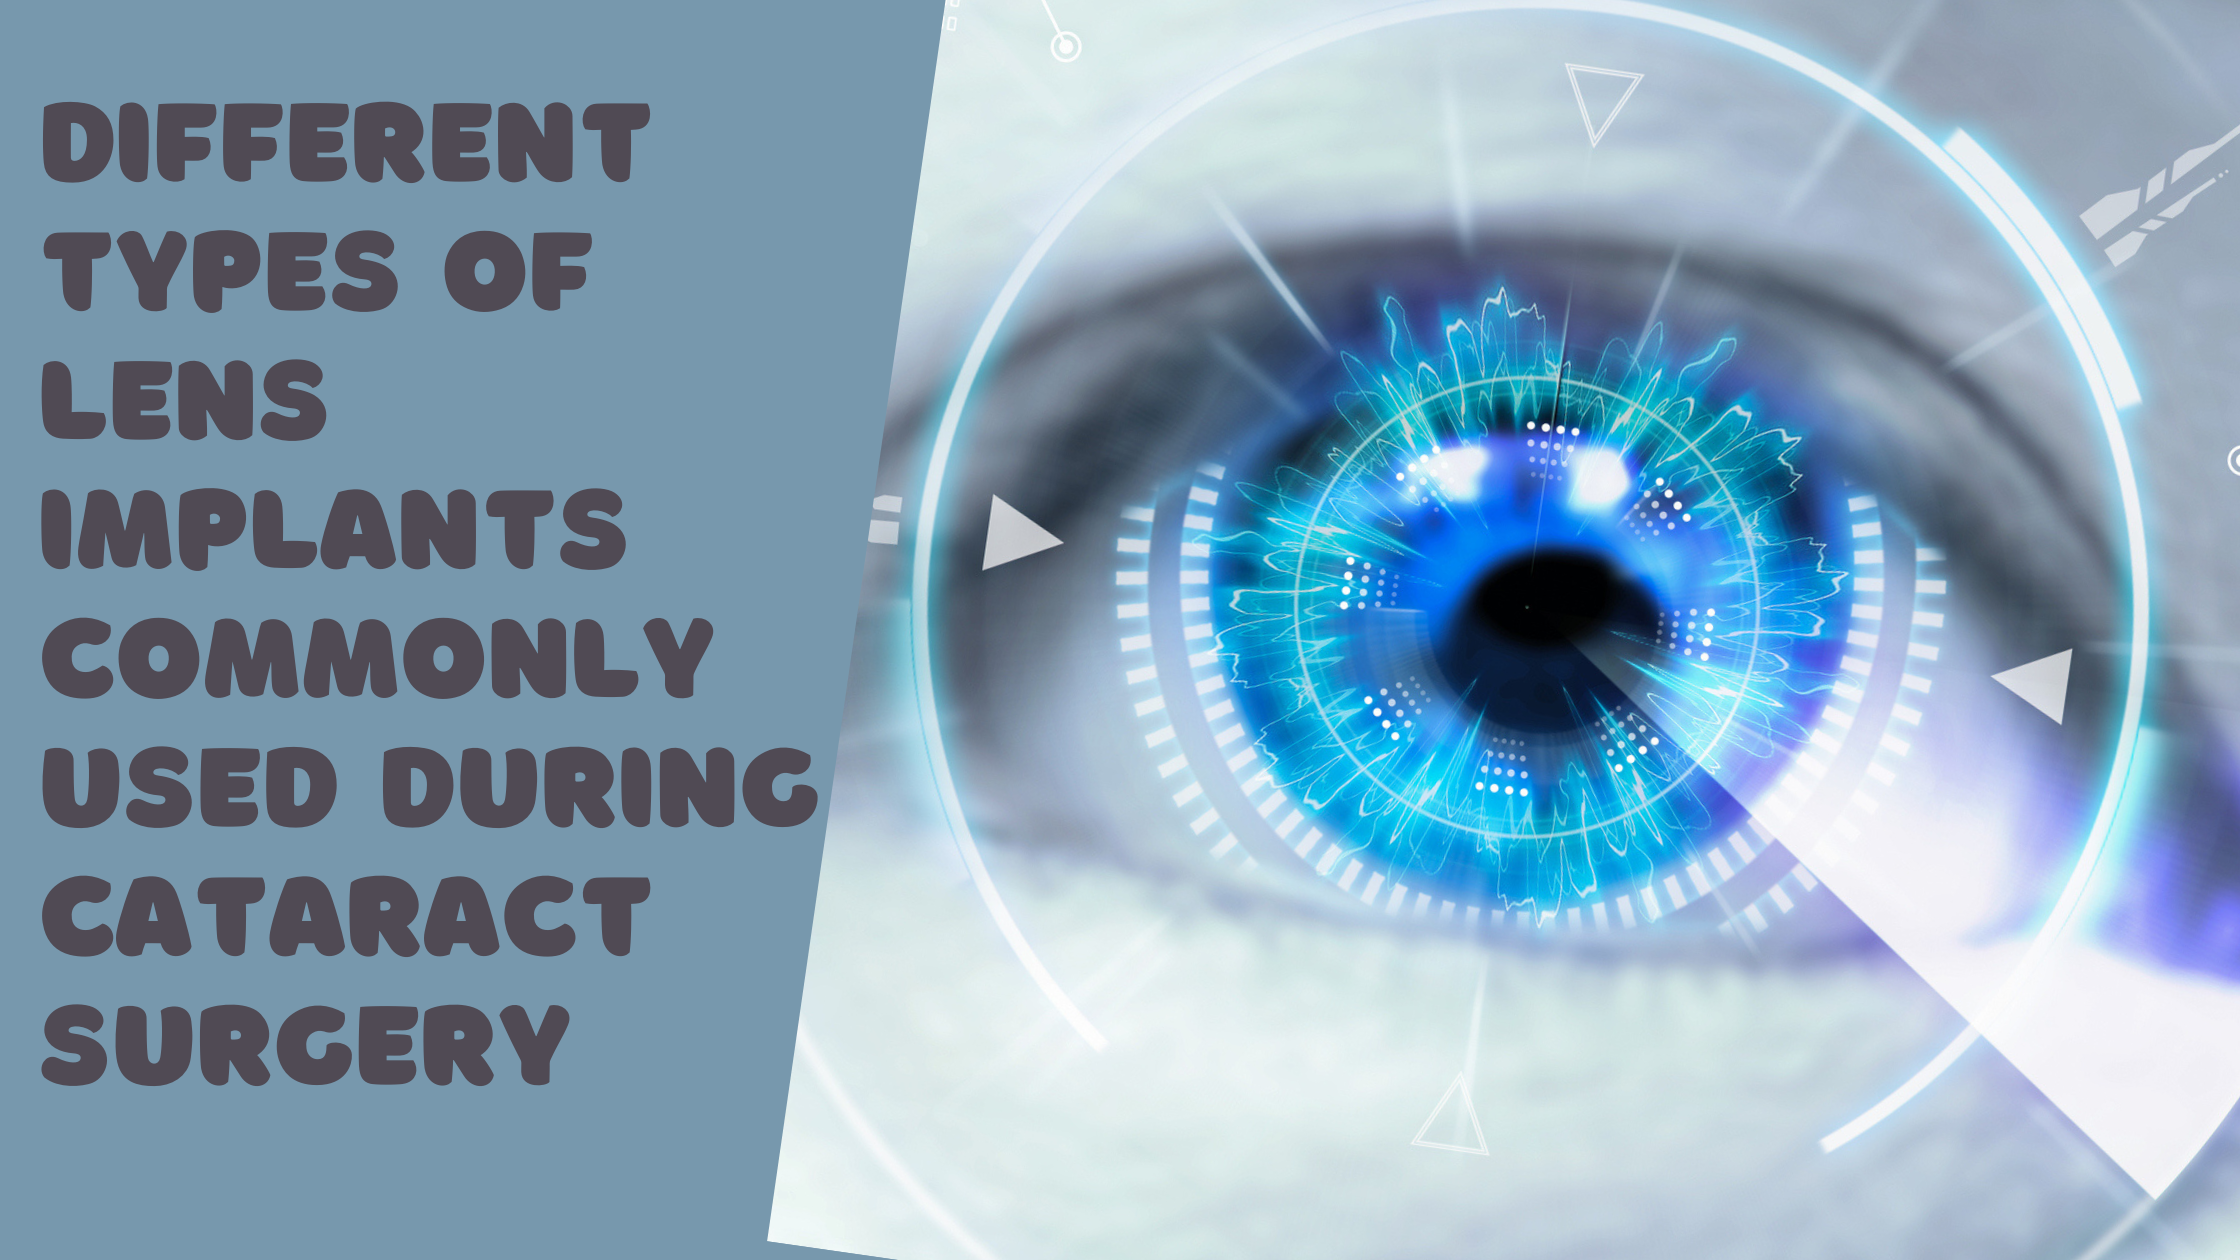 Different types of lens implants commonly used during cataract surgery